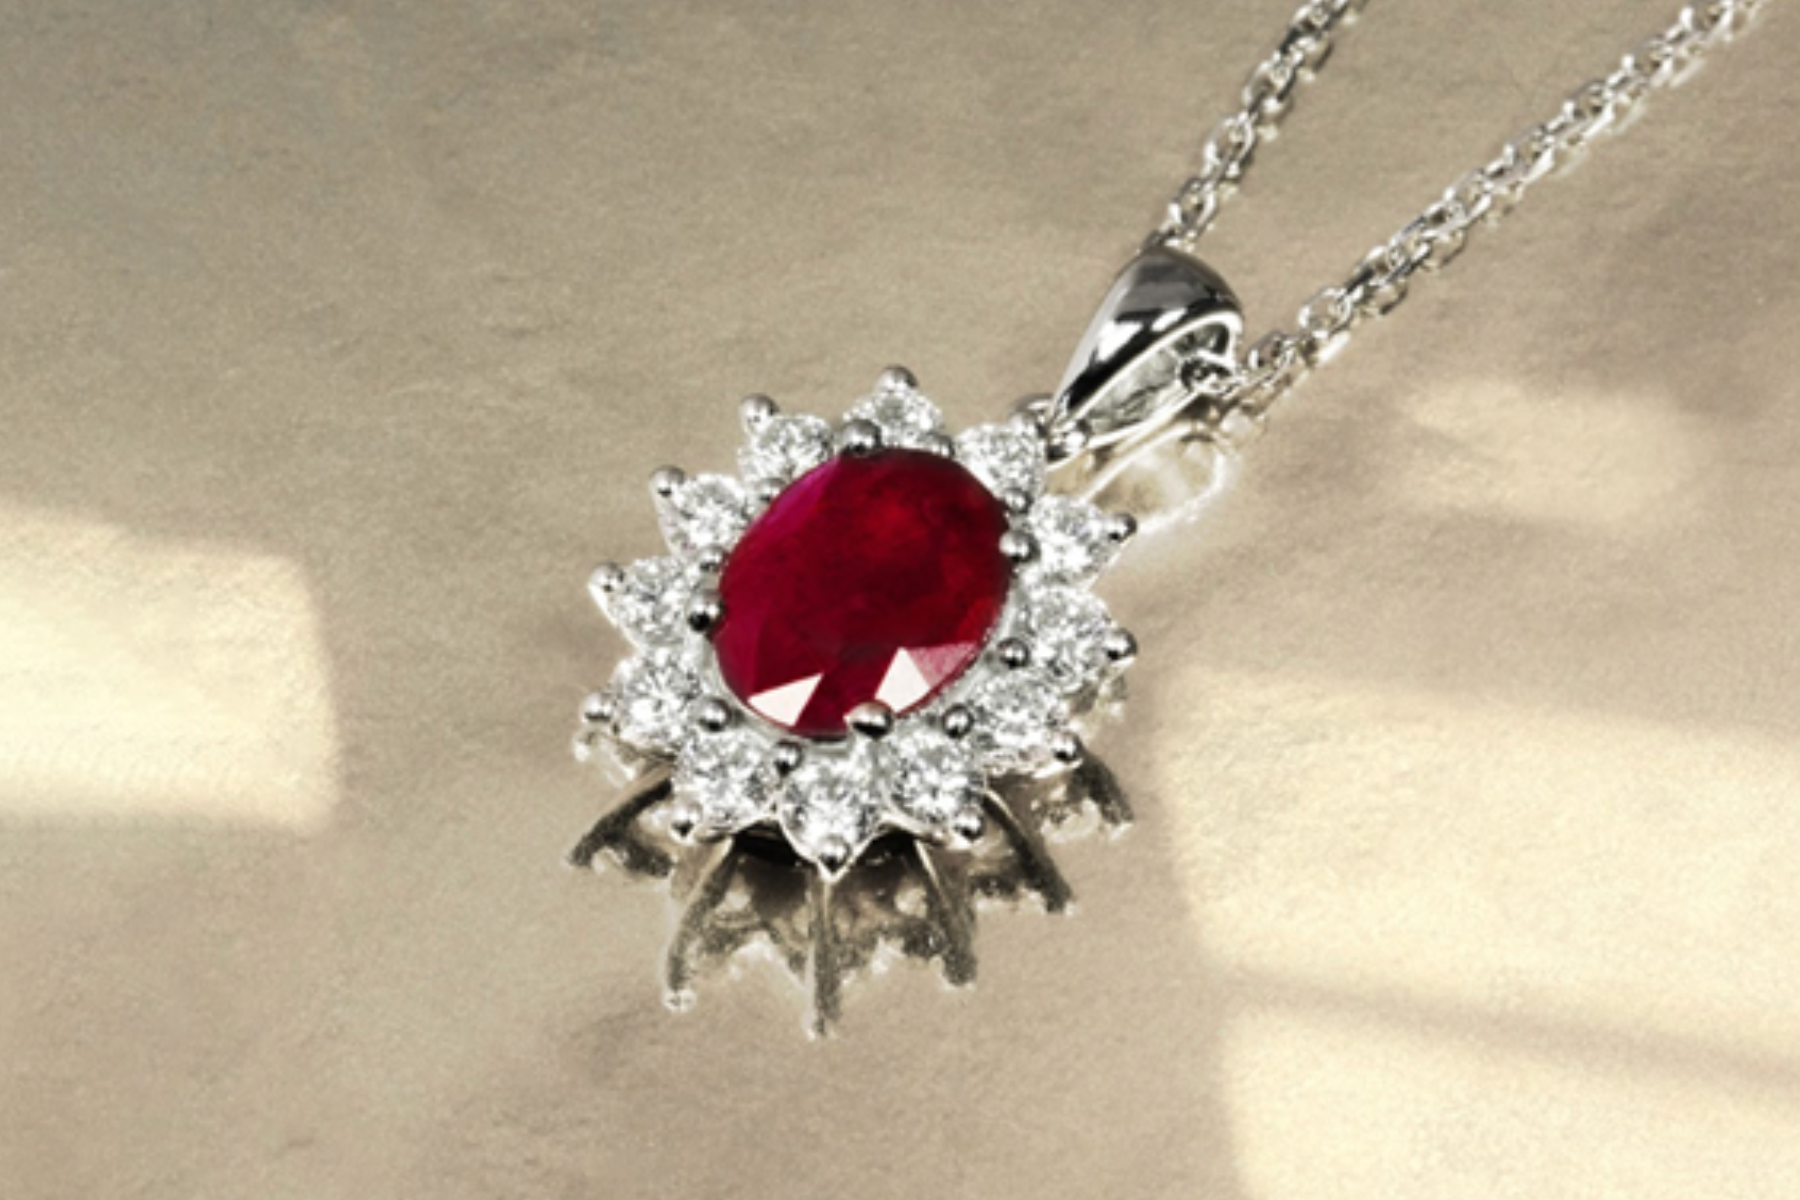 A Ruby pendant on a silver lace